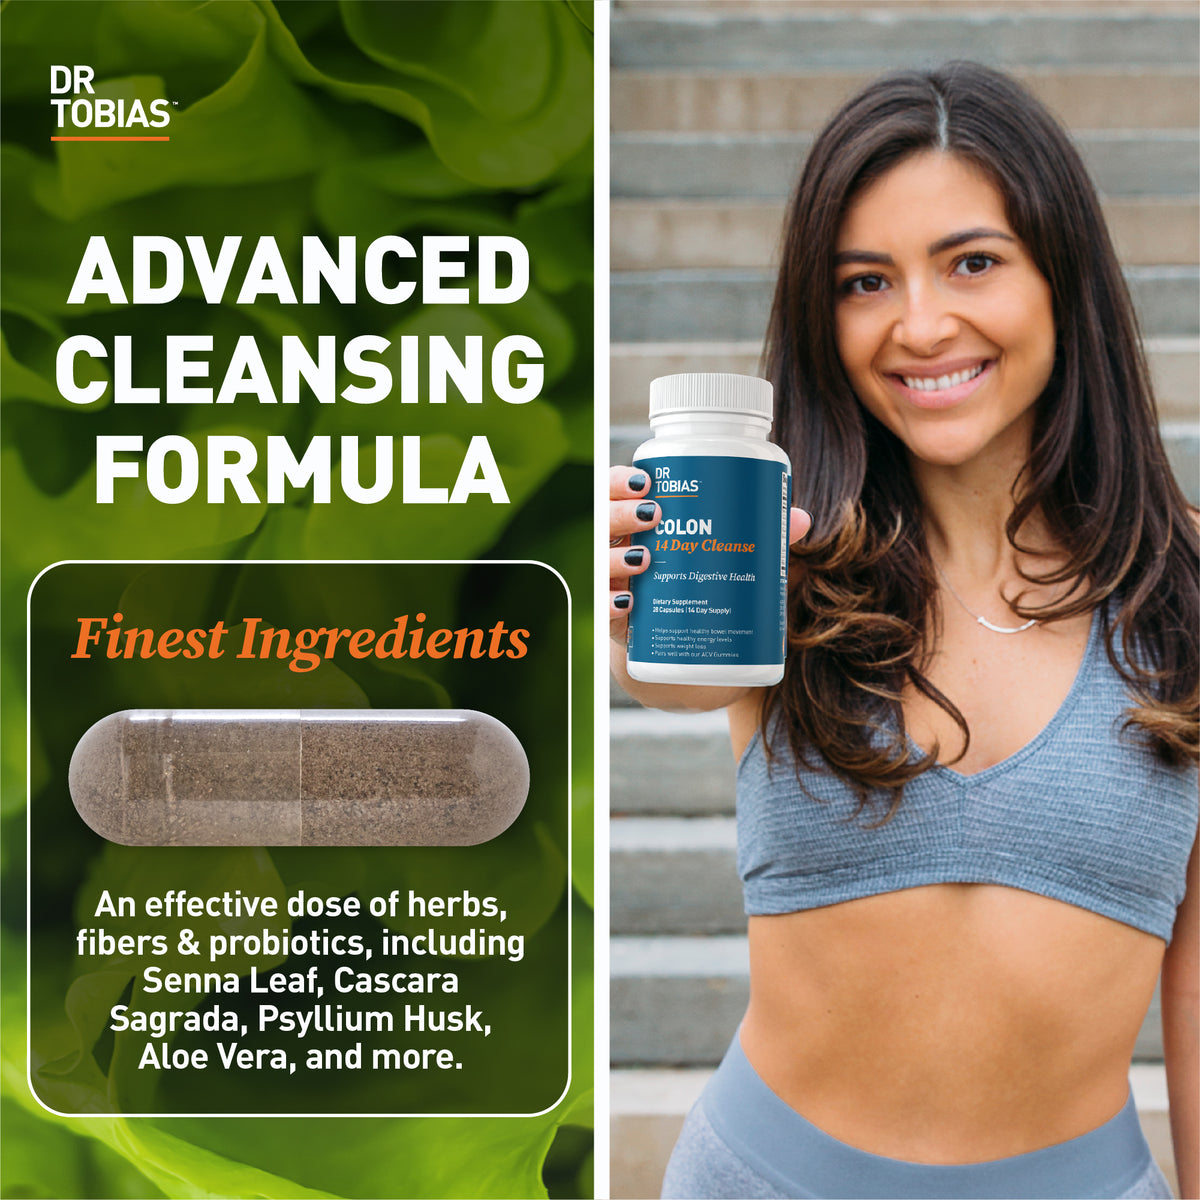 Advanced Cleansing Formula with the finest ingredients 